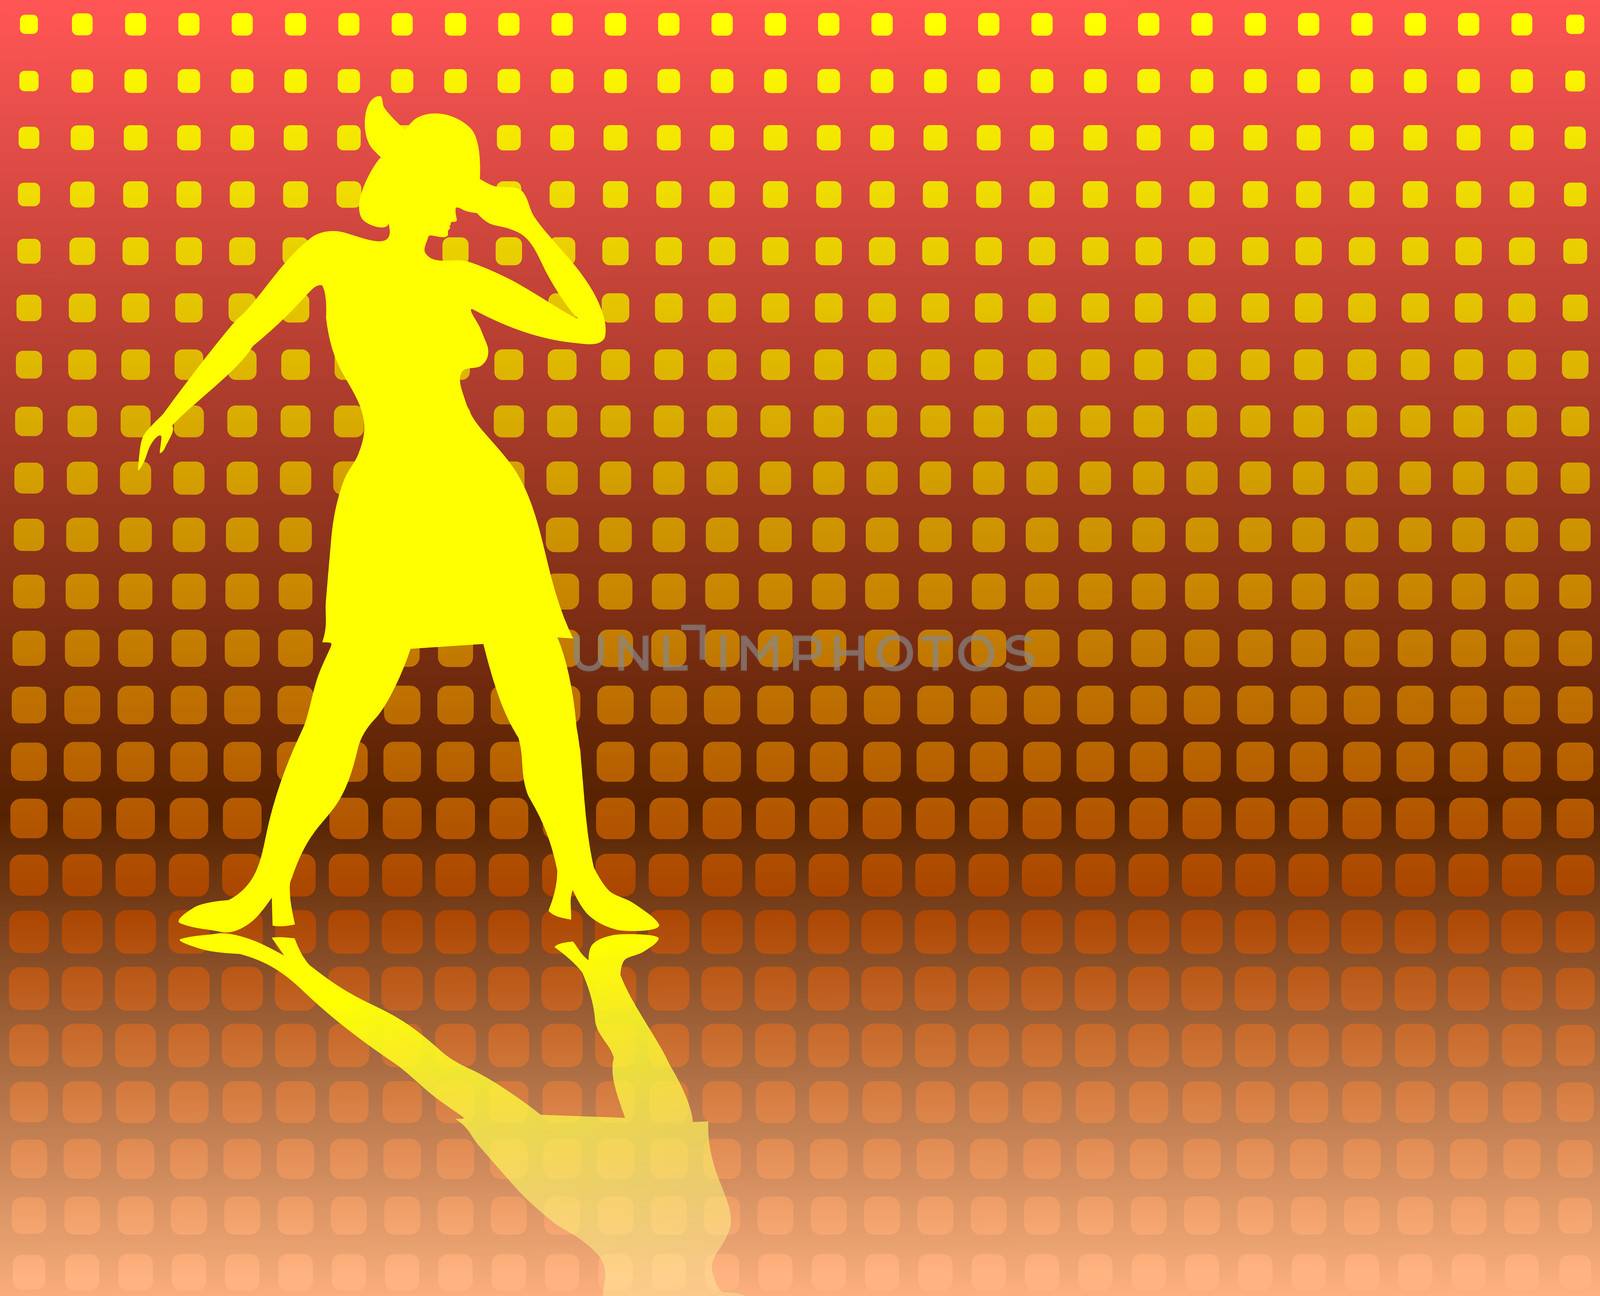 Tap Dancing Lady on a Jazzy Background  by RichieThakur